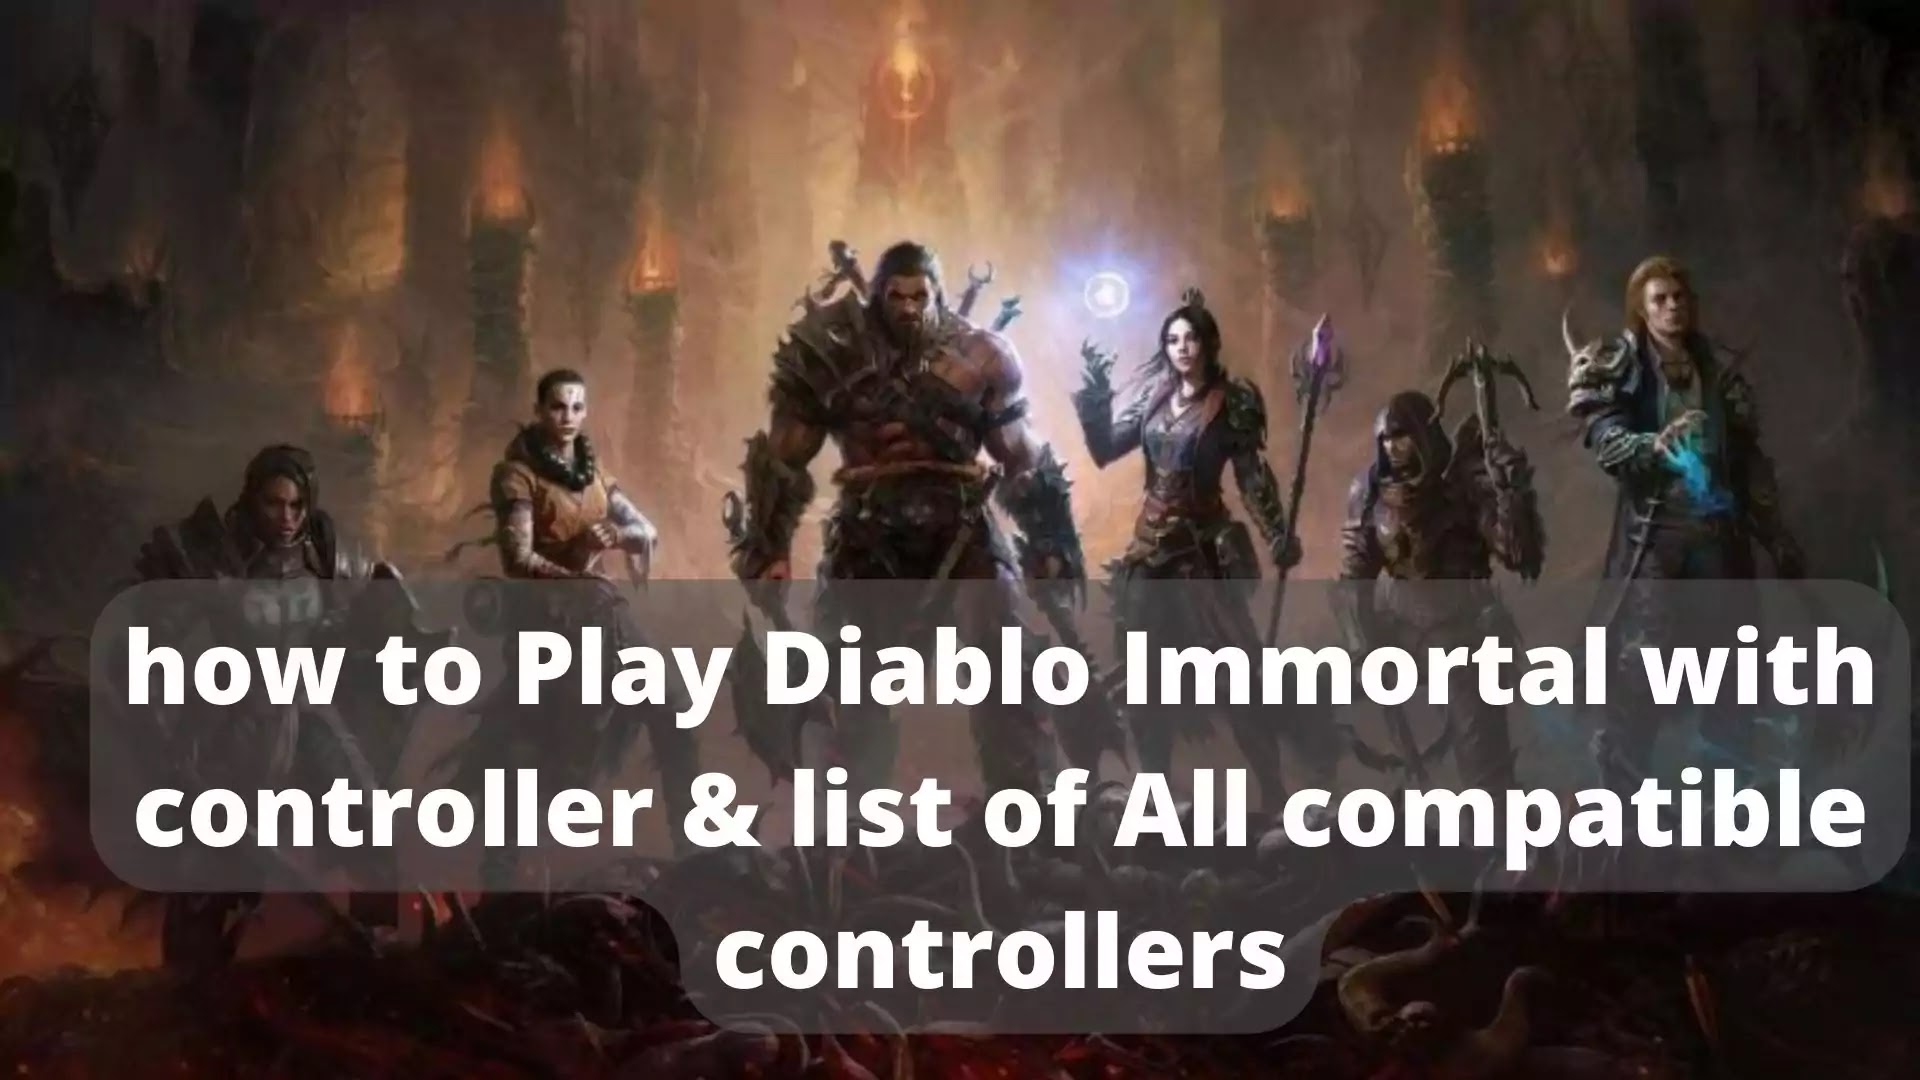 Play Diablo Immortal with a controller and list of compatible controllers